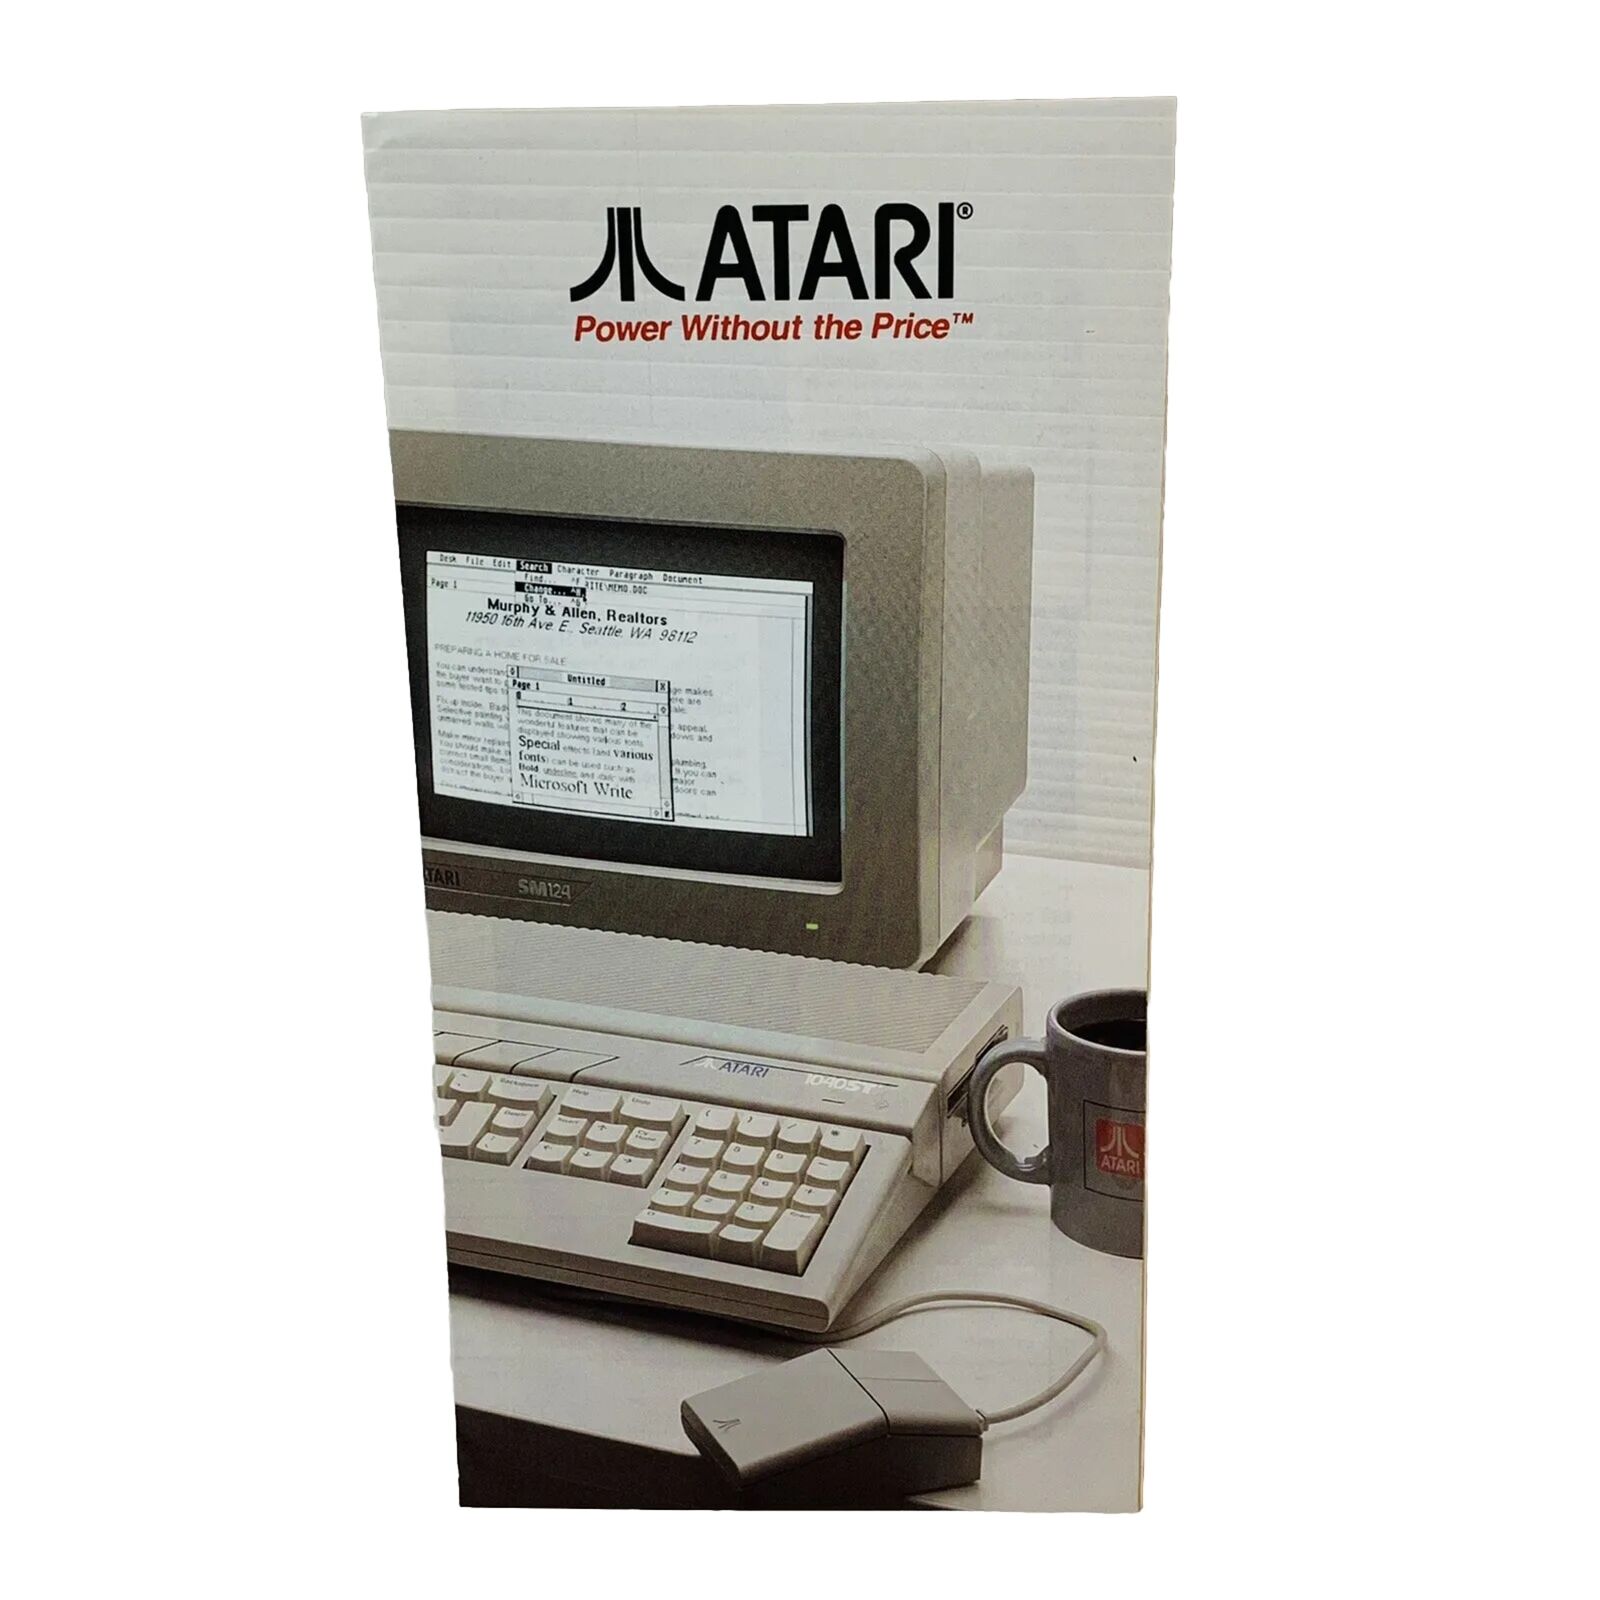 Atari 1040st Sales Brochure Pamphlet Power Without The Price Vintage 80s